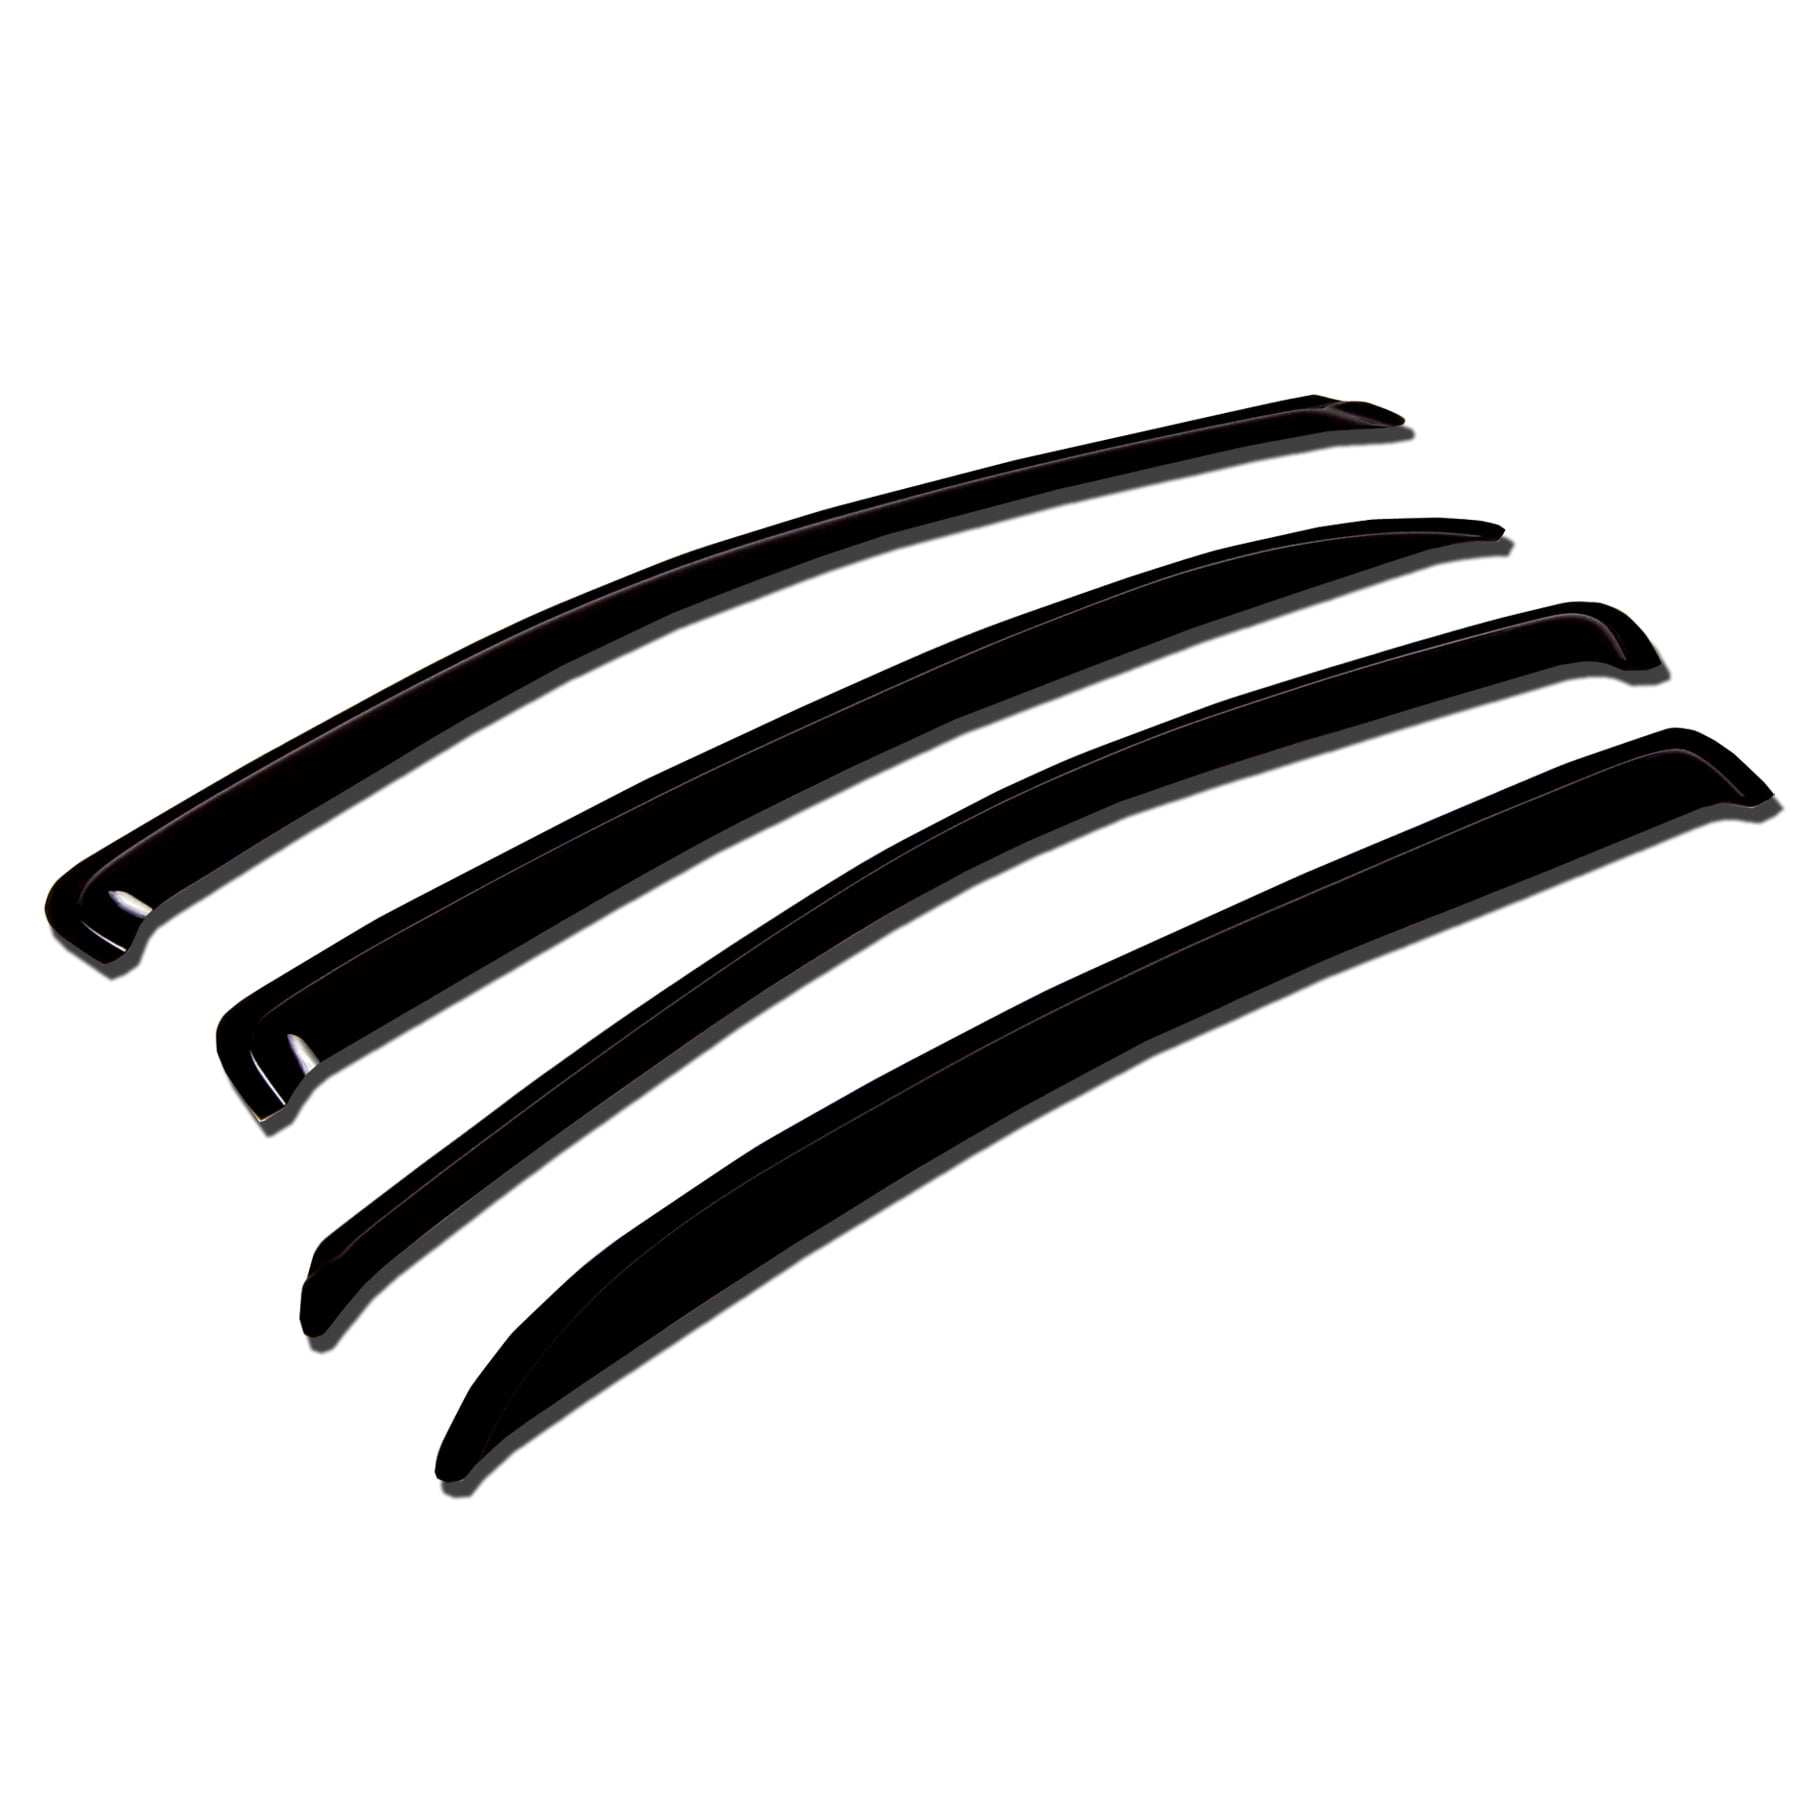 4PC SET IN CHANNEL RAIN GUARDS FOR VOLVO XC90 2003-2014